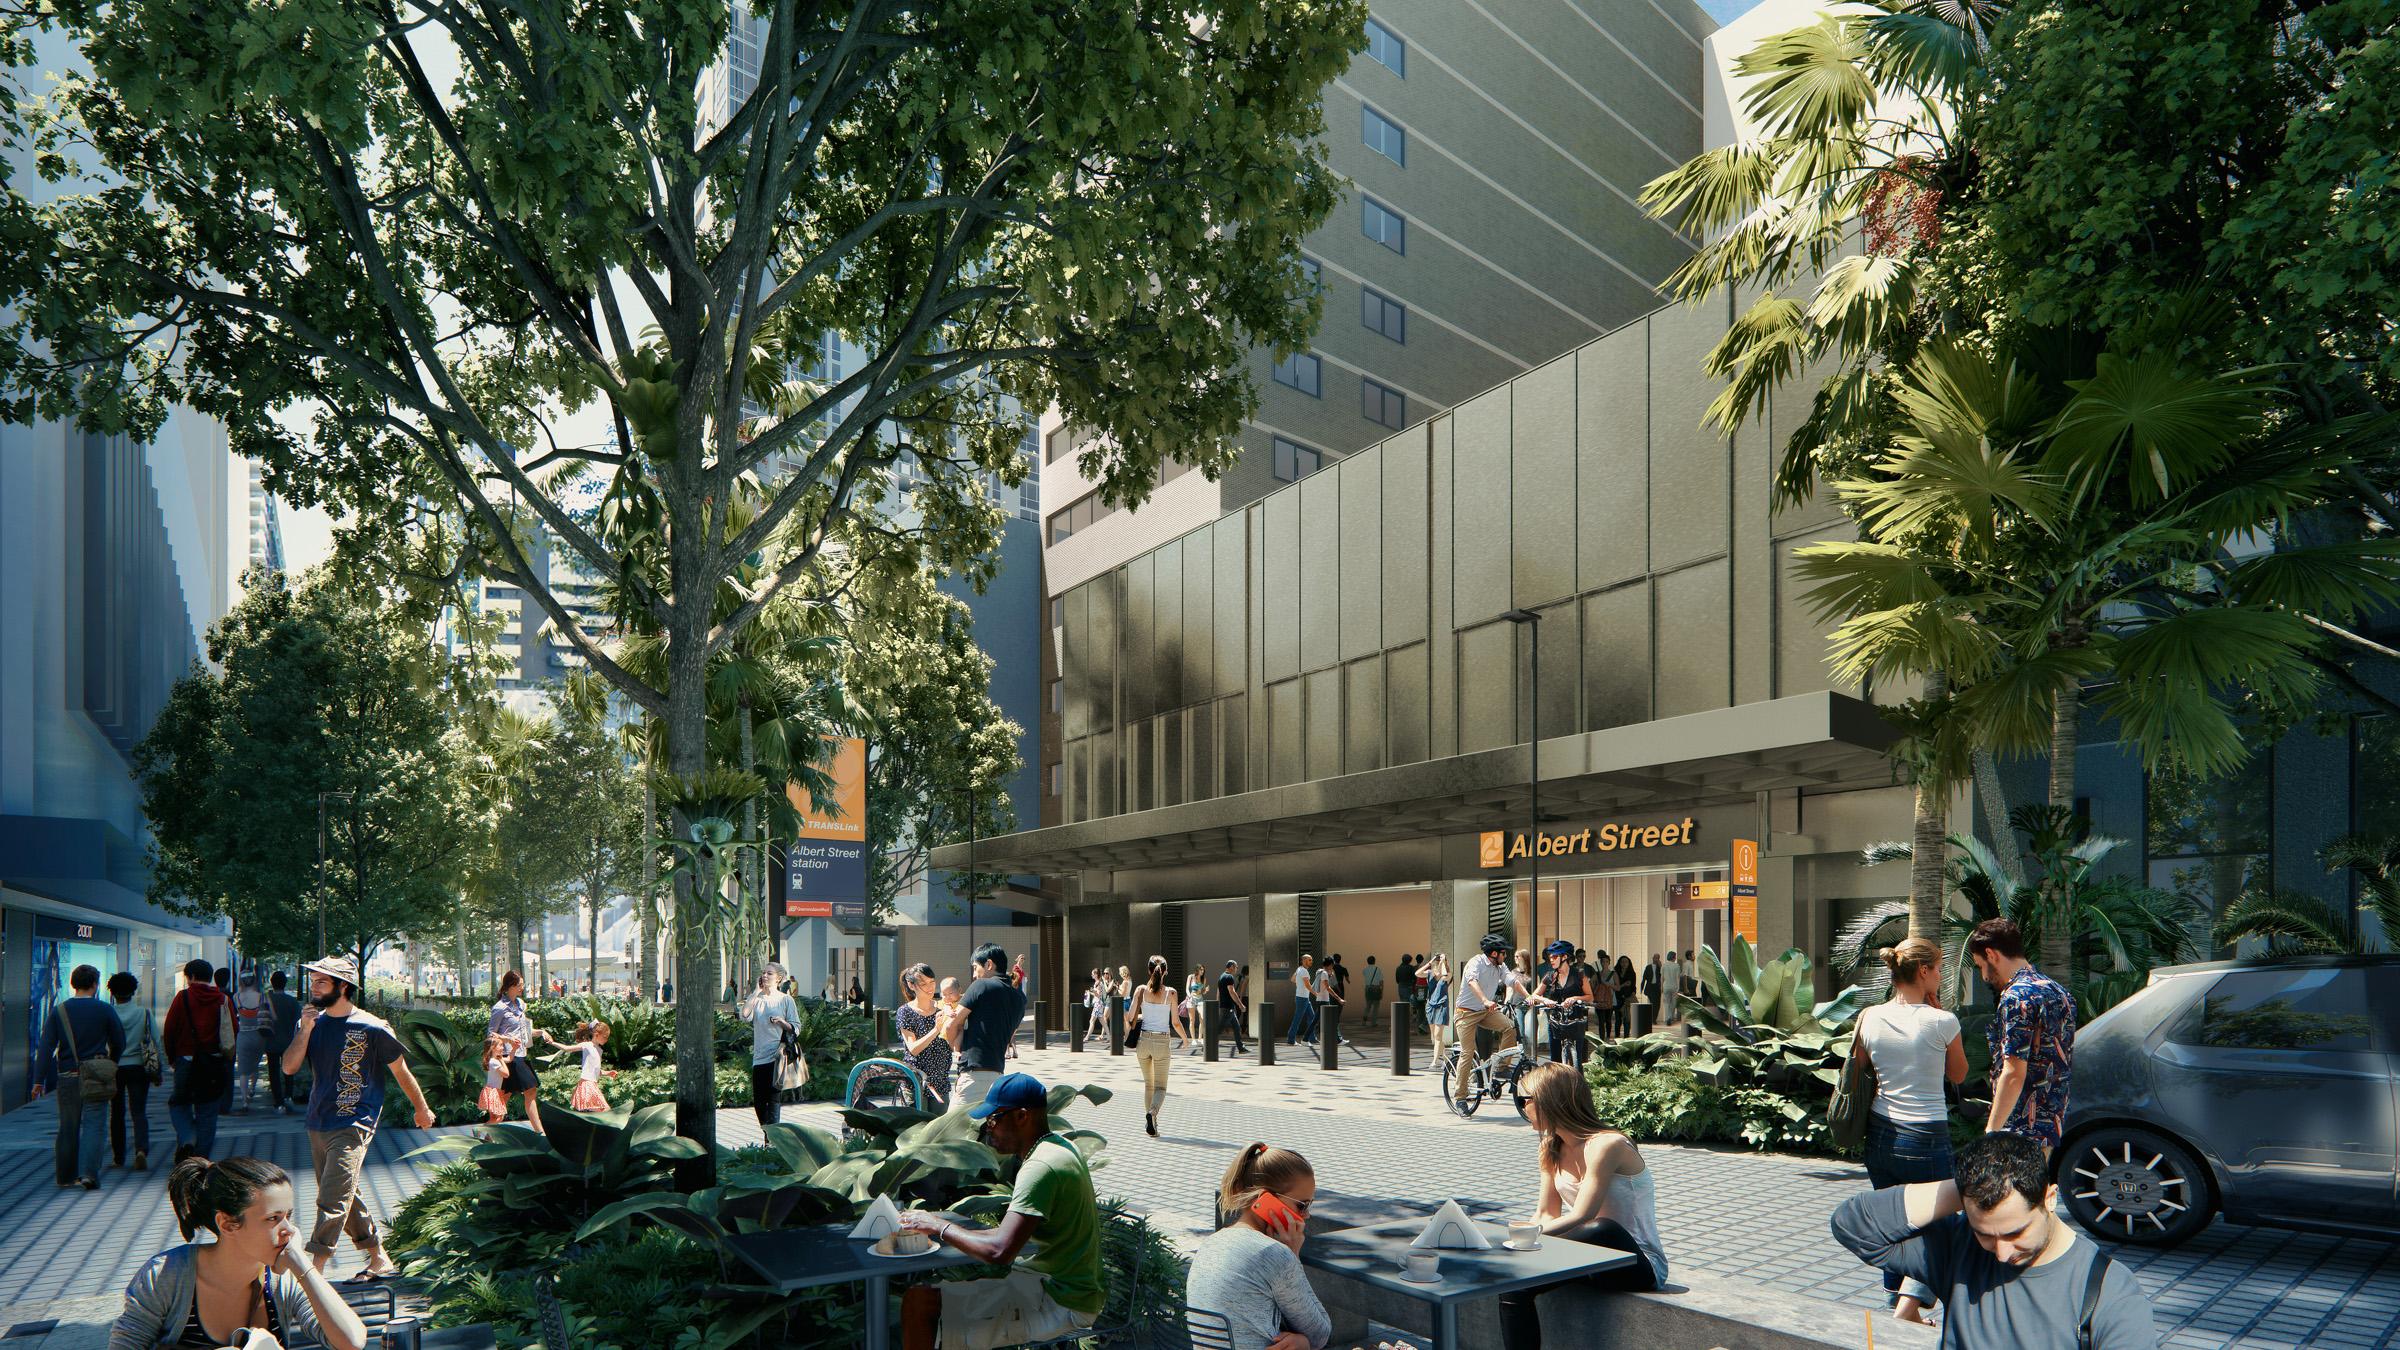 Computer-rendered view of Albert Street station, showing families and people enjoying the sunny weather outside